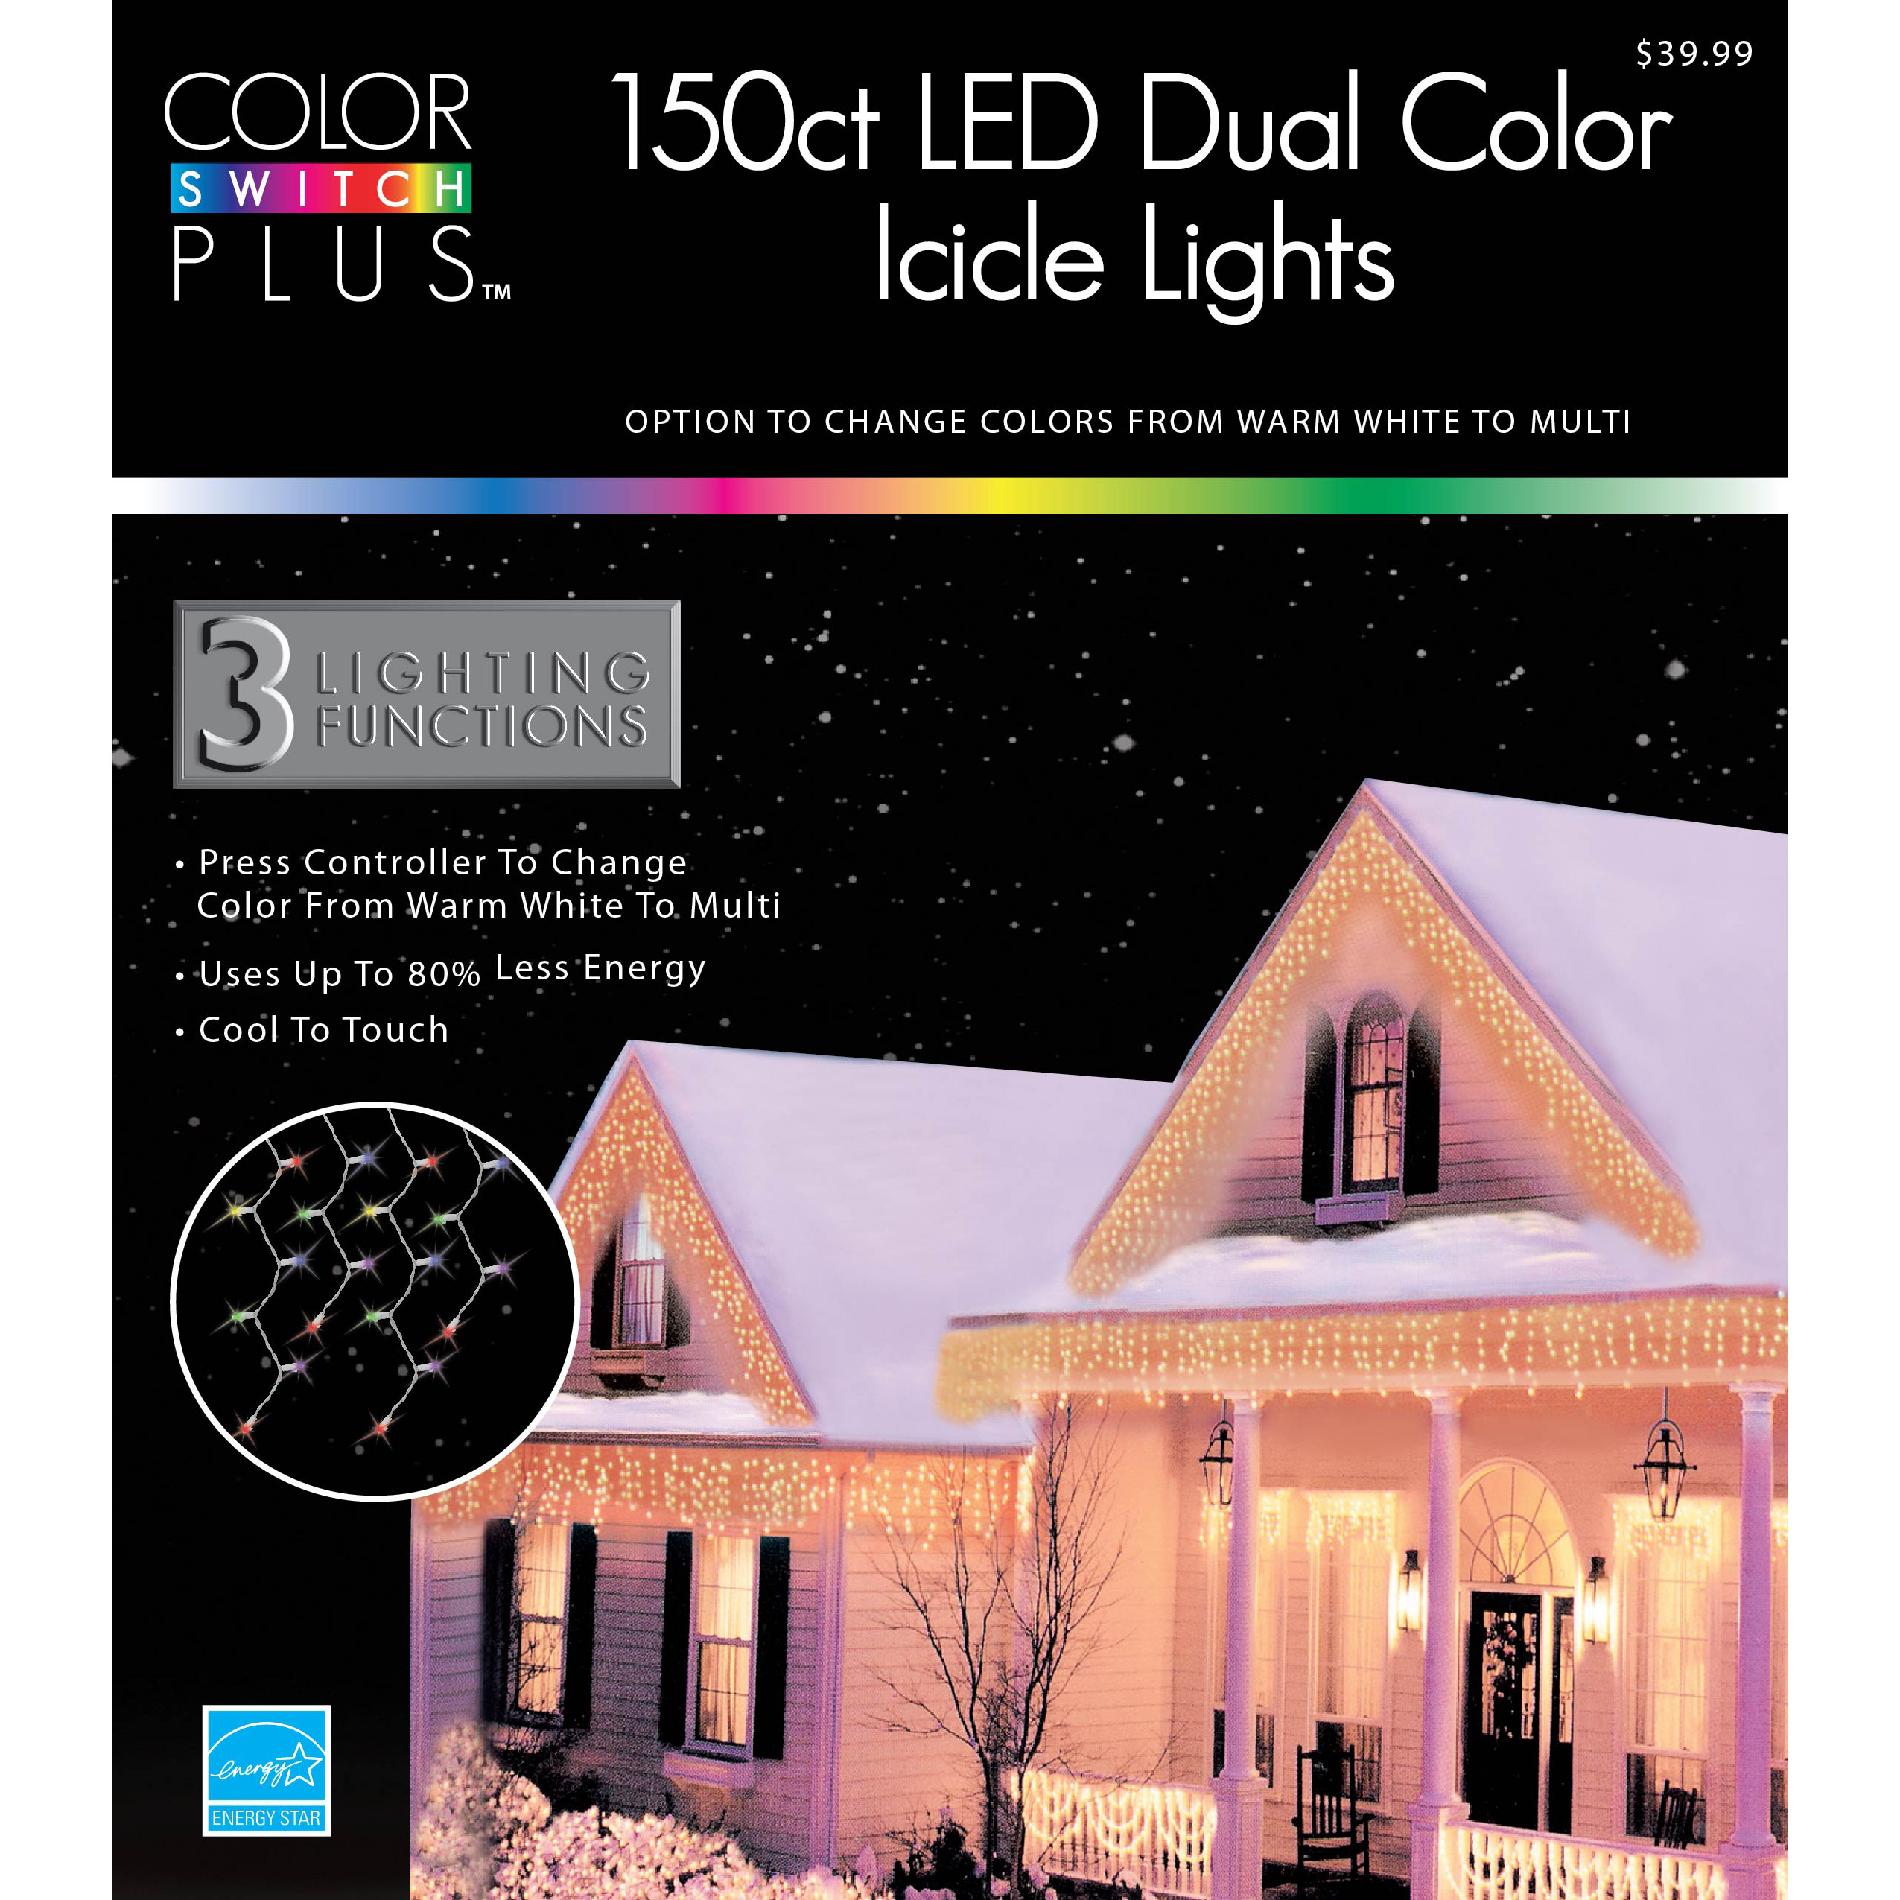 Color Switch Plus 150 Dual Color LED 3 Function Icicle Lights